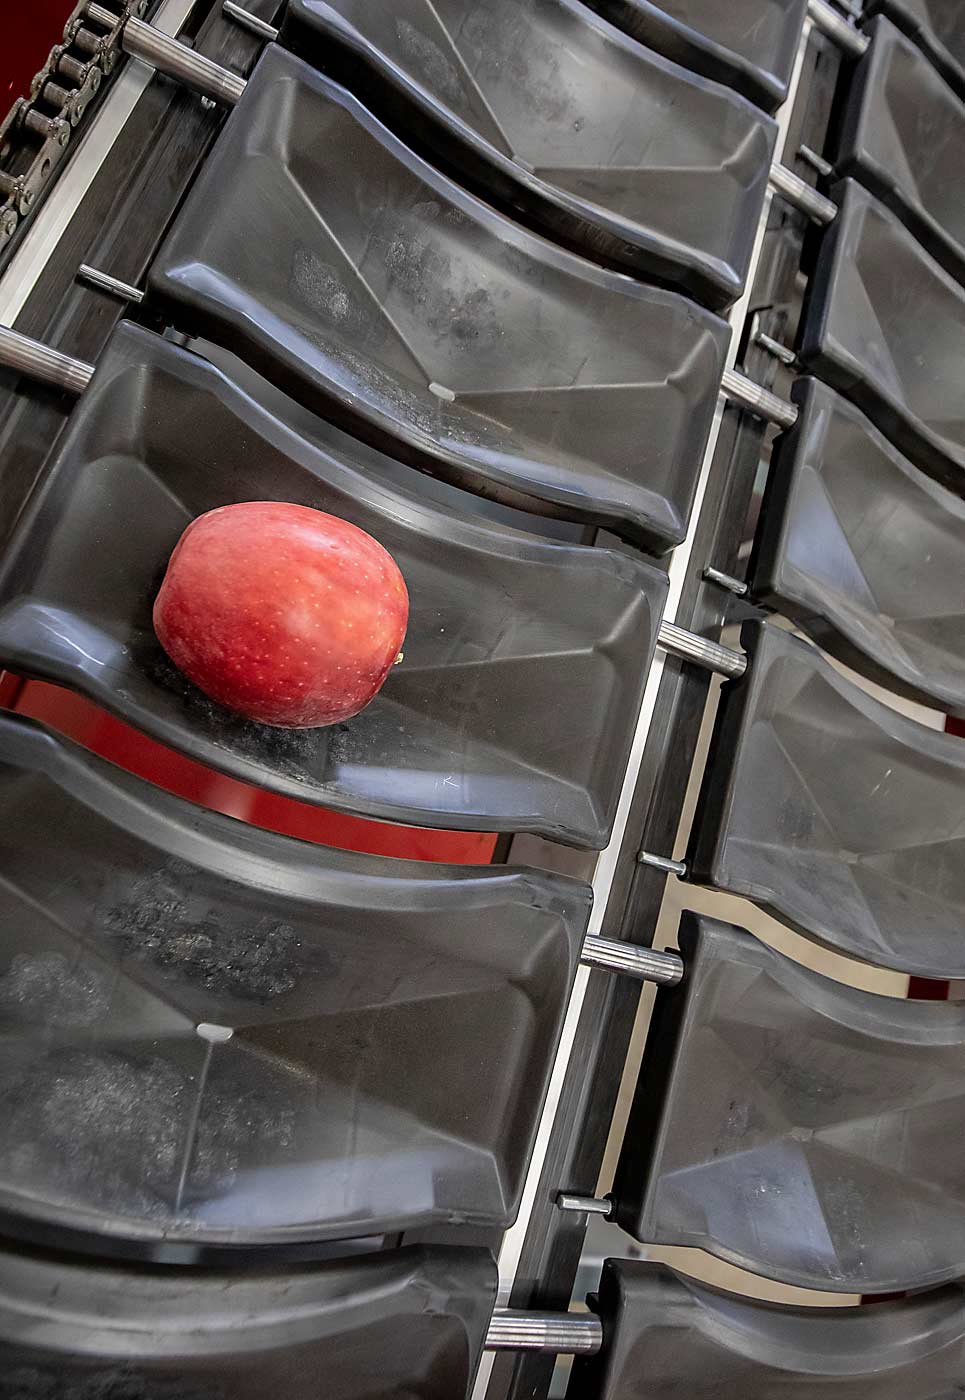 The new optical sorting line features cups known as singulators, shown here, that can align and rotate both apples and pears for optical sorting. (TJ Mullinax/Good Fruit Grower)